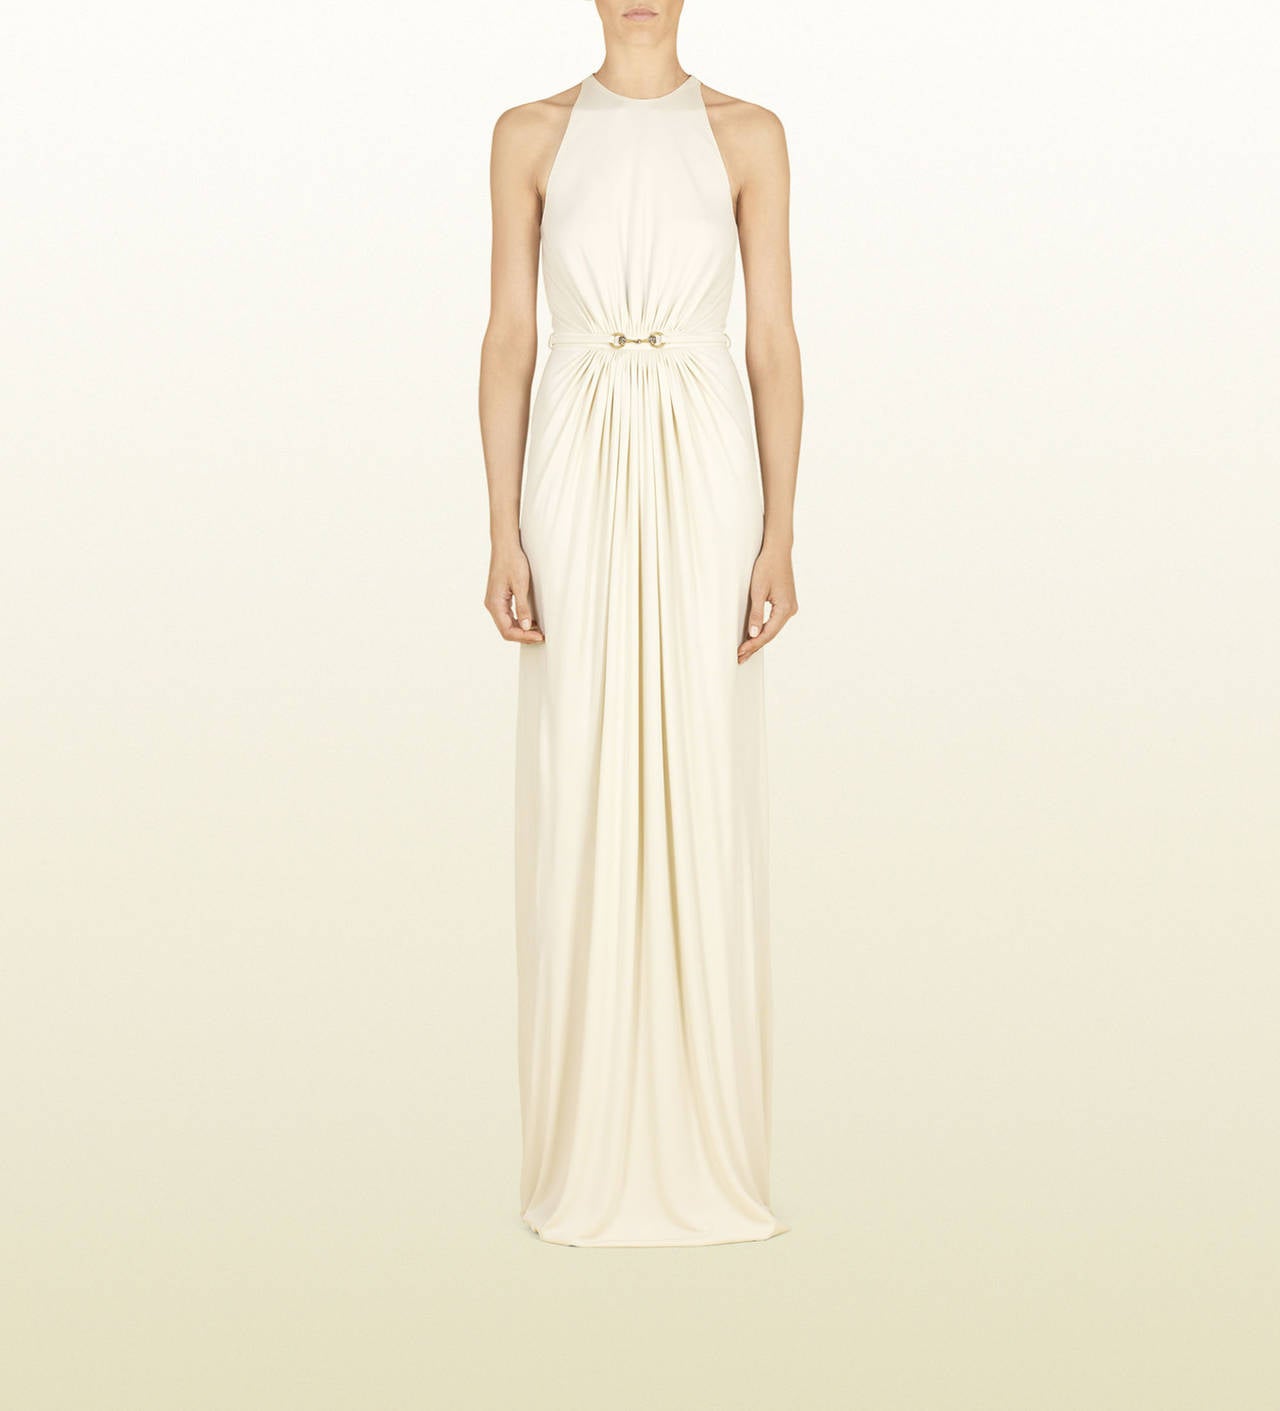 Gucci cream long dress

Size S

Jersey

New, with tags